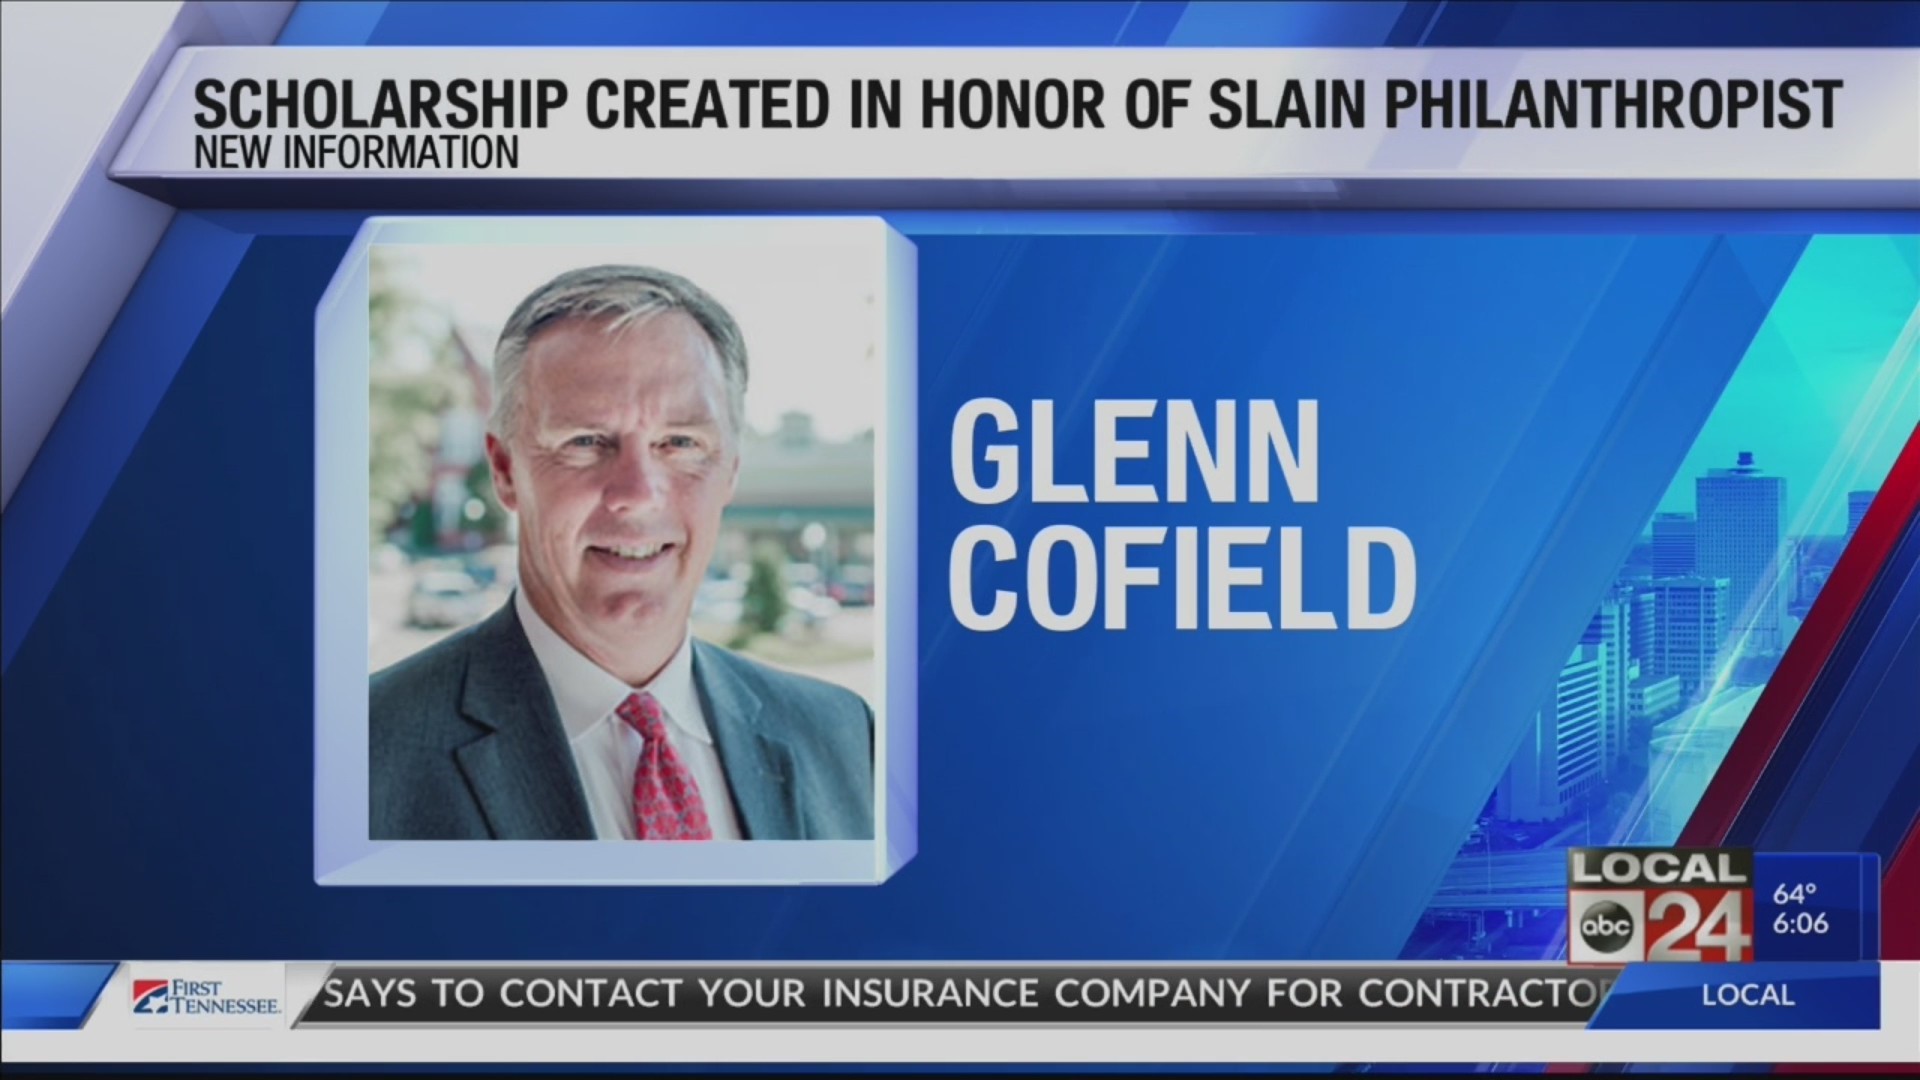 Months after prominent businessman Glenn Cofield is shot to death in Memphis, Ole Miss honors him